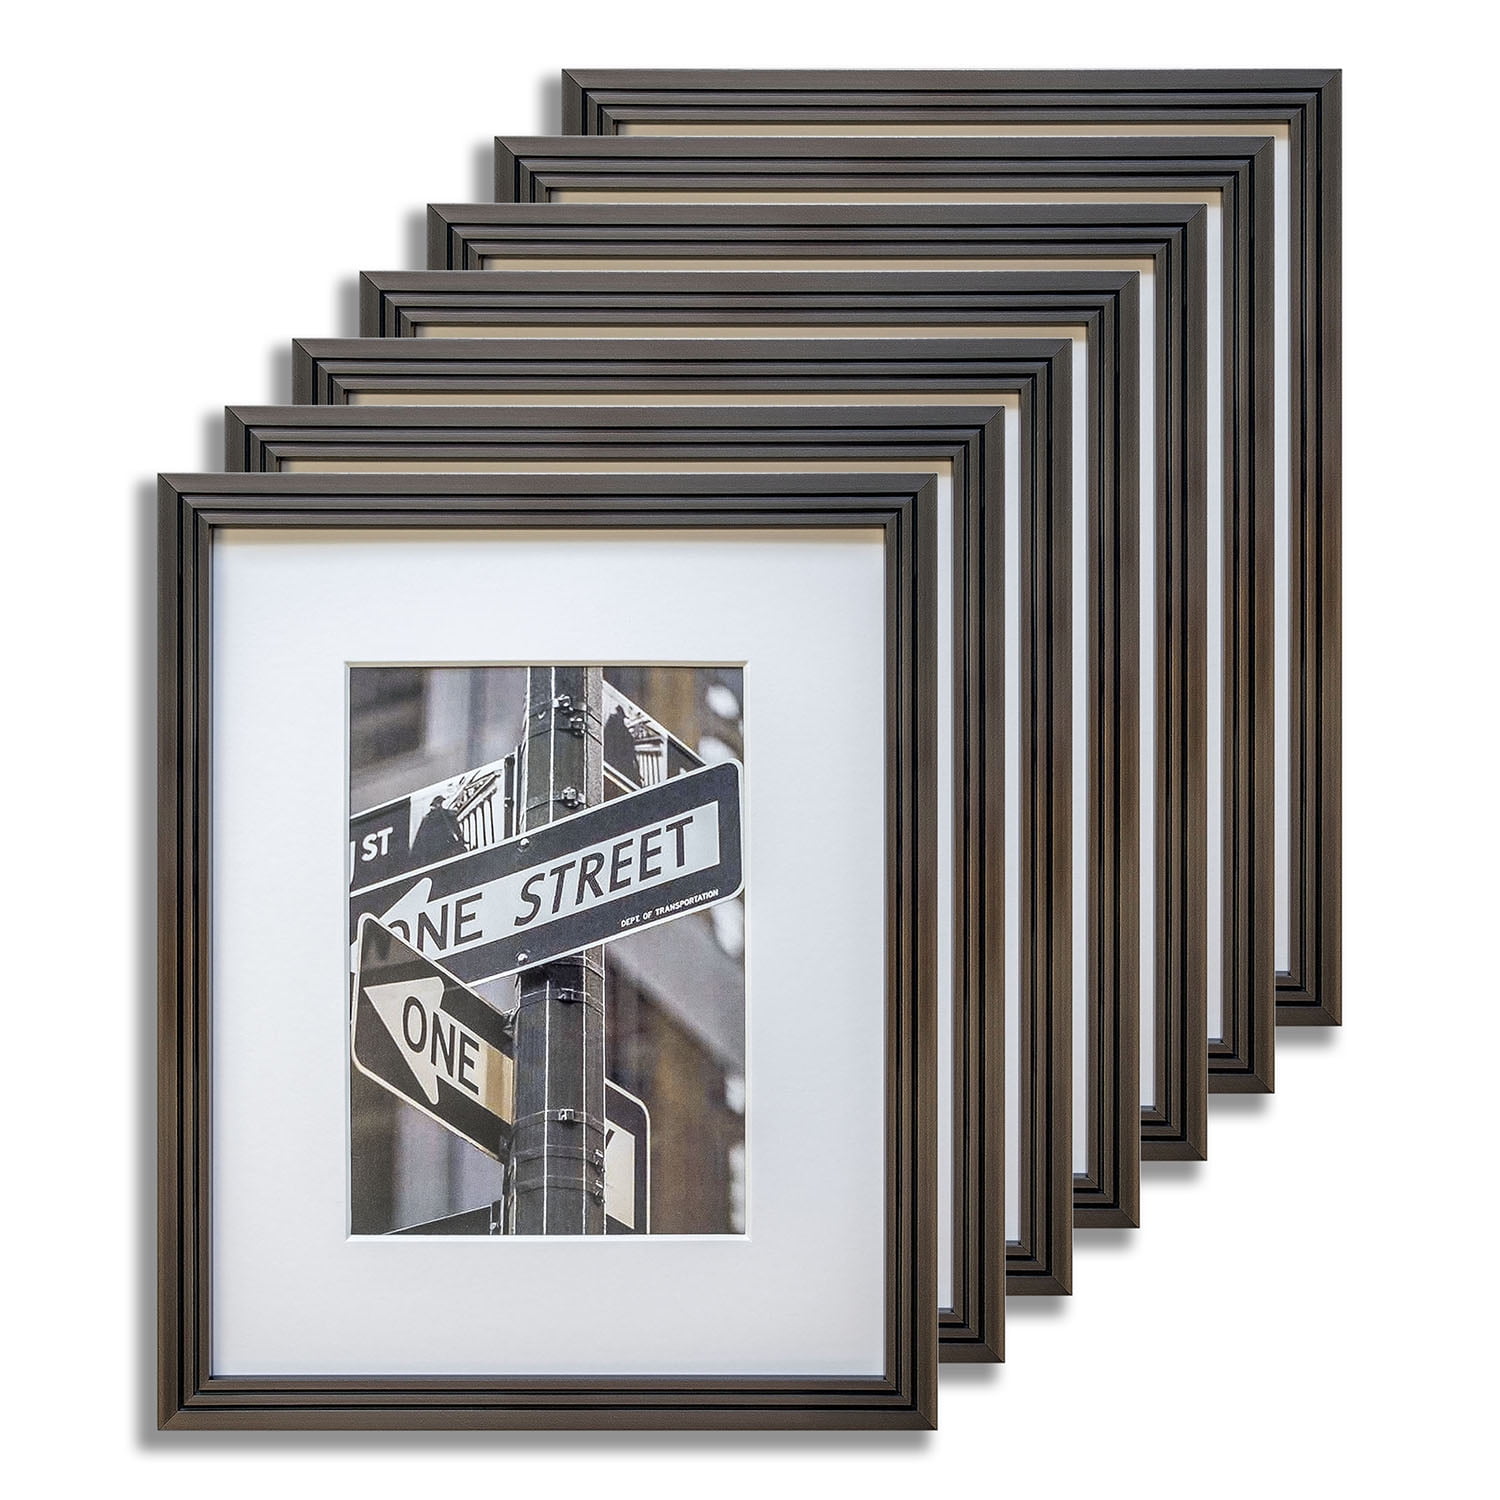 Great for Photos White Mat for 4x6 Picture Pictures 5x7 Black with Gold Trim Color Frame Landscape Portrait Display Sawtooth Hanger Easel Stand 